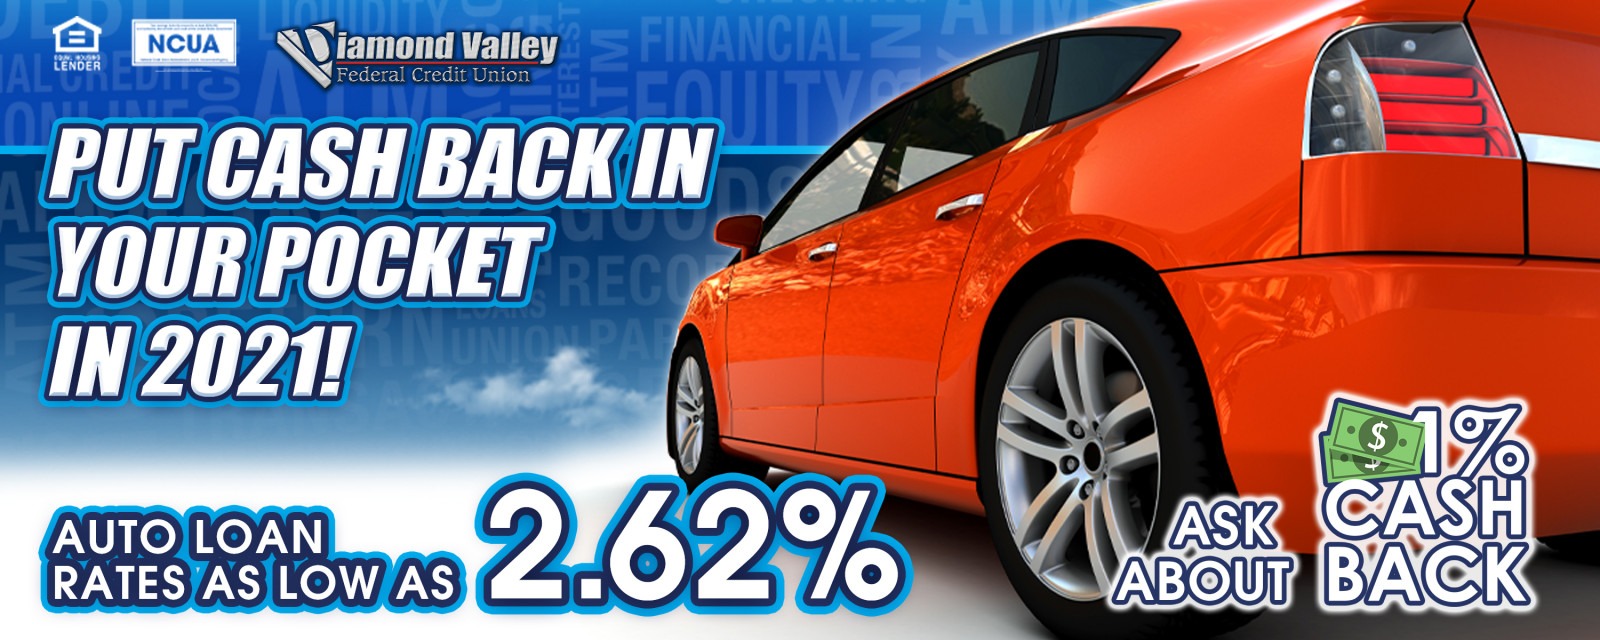 Auto Loans as low as 2.62%! Ask about 1% CASH BACK!